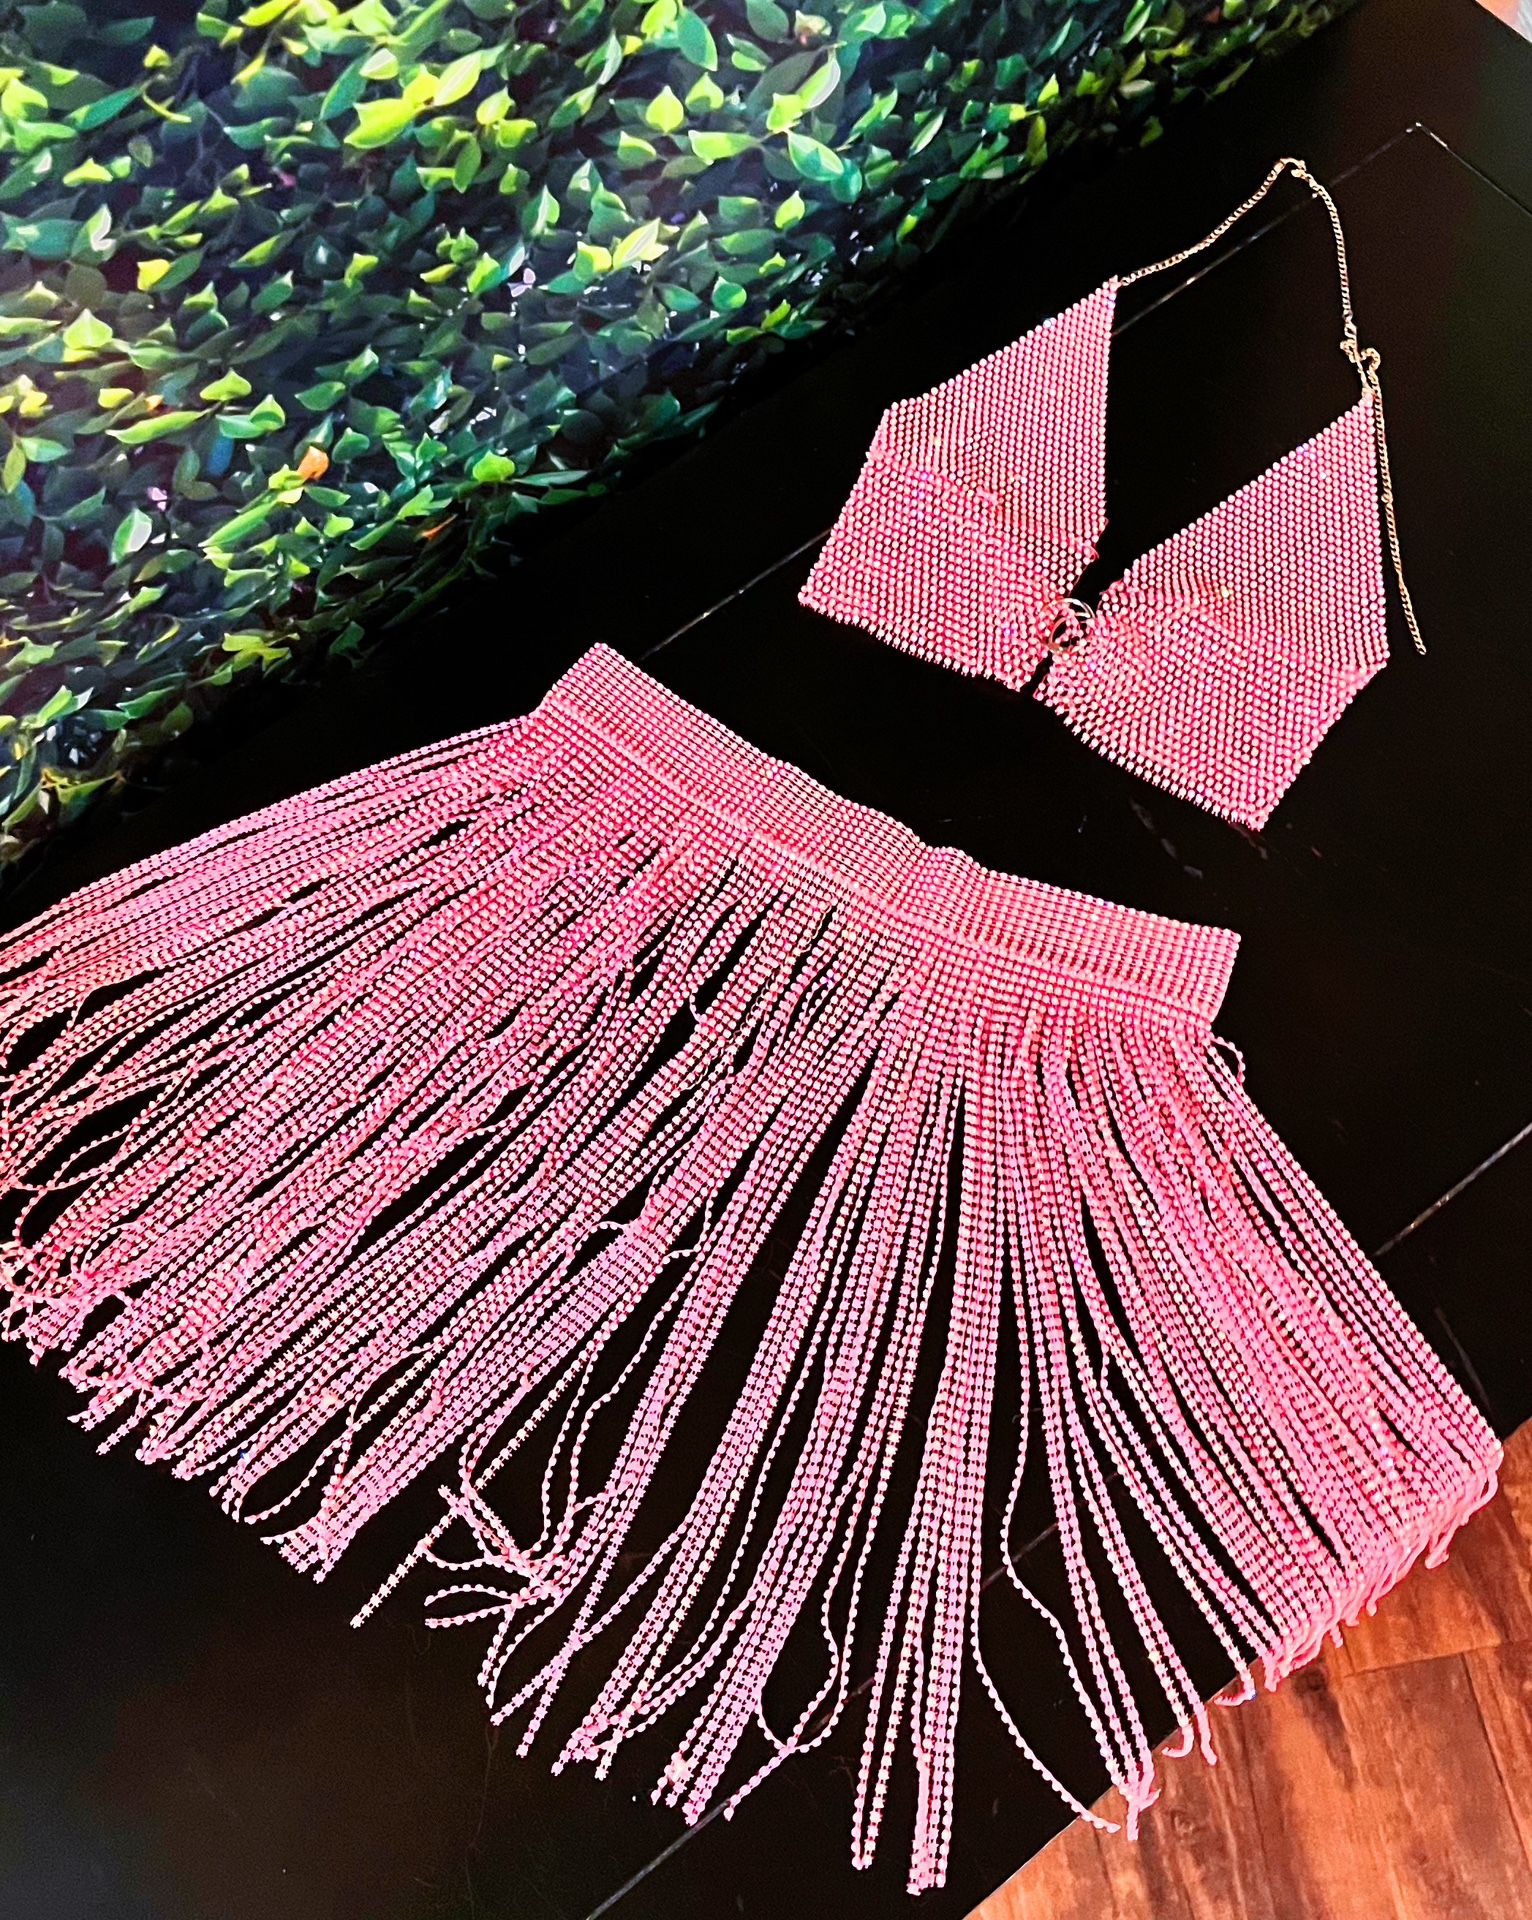 EDC Pink Sparkly Rave Outfit - Sequin Fringe Skirt and Top